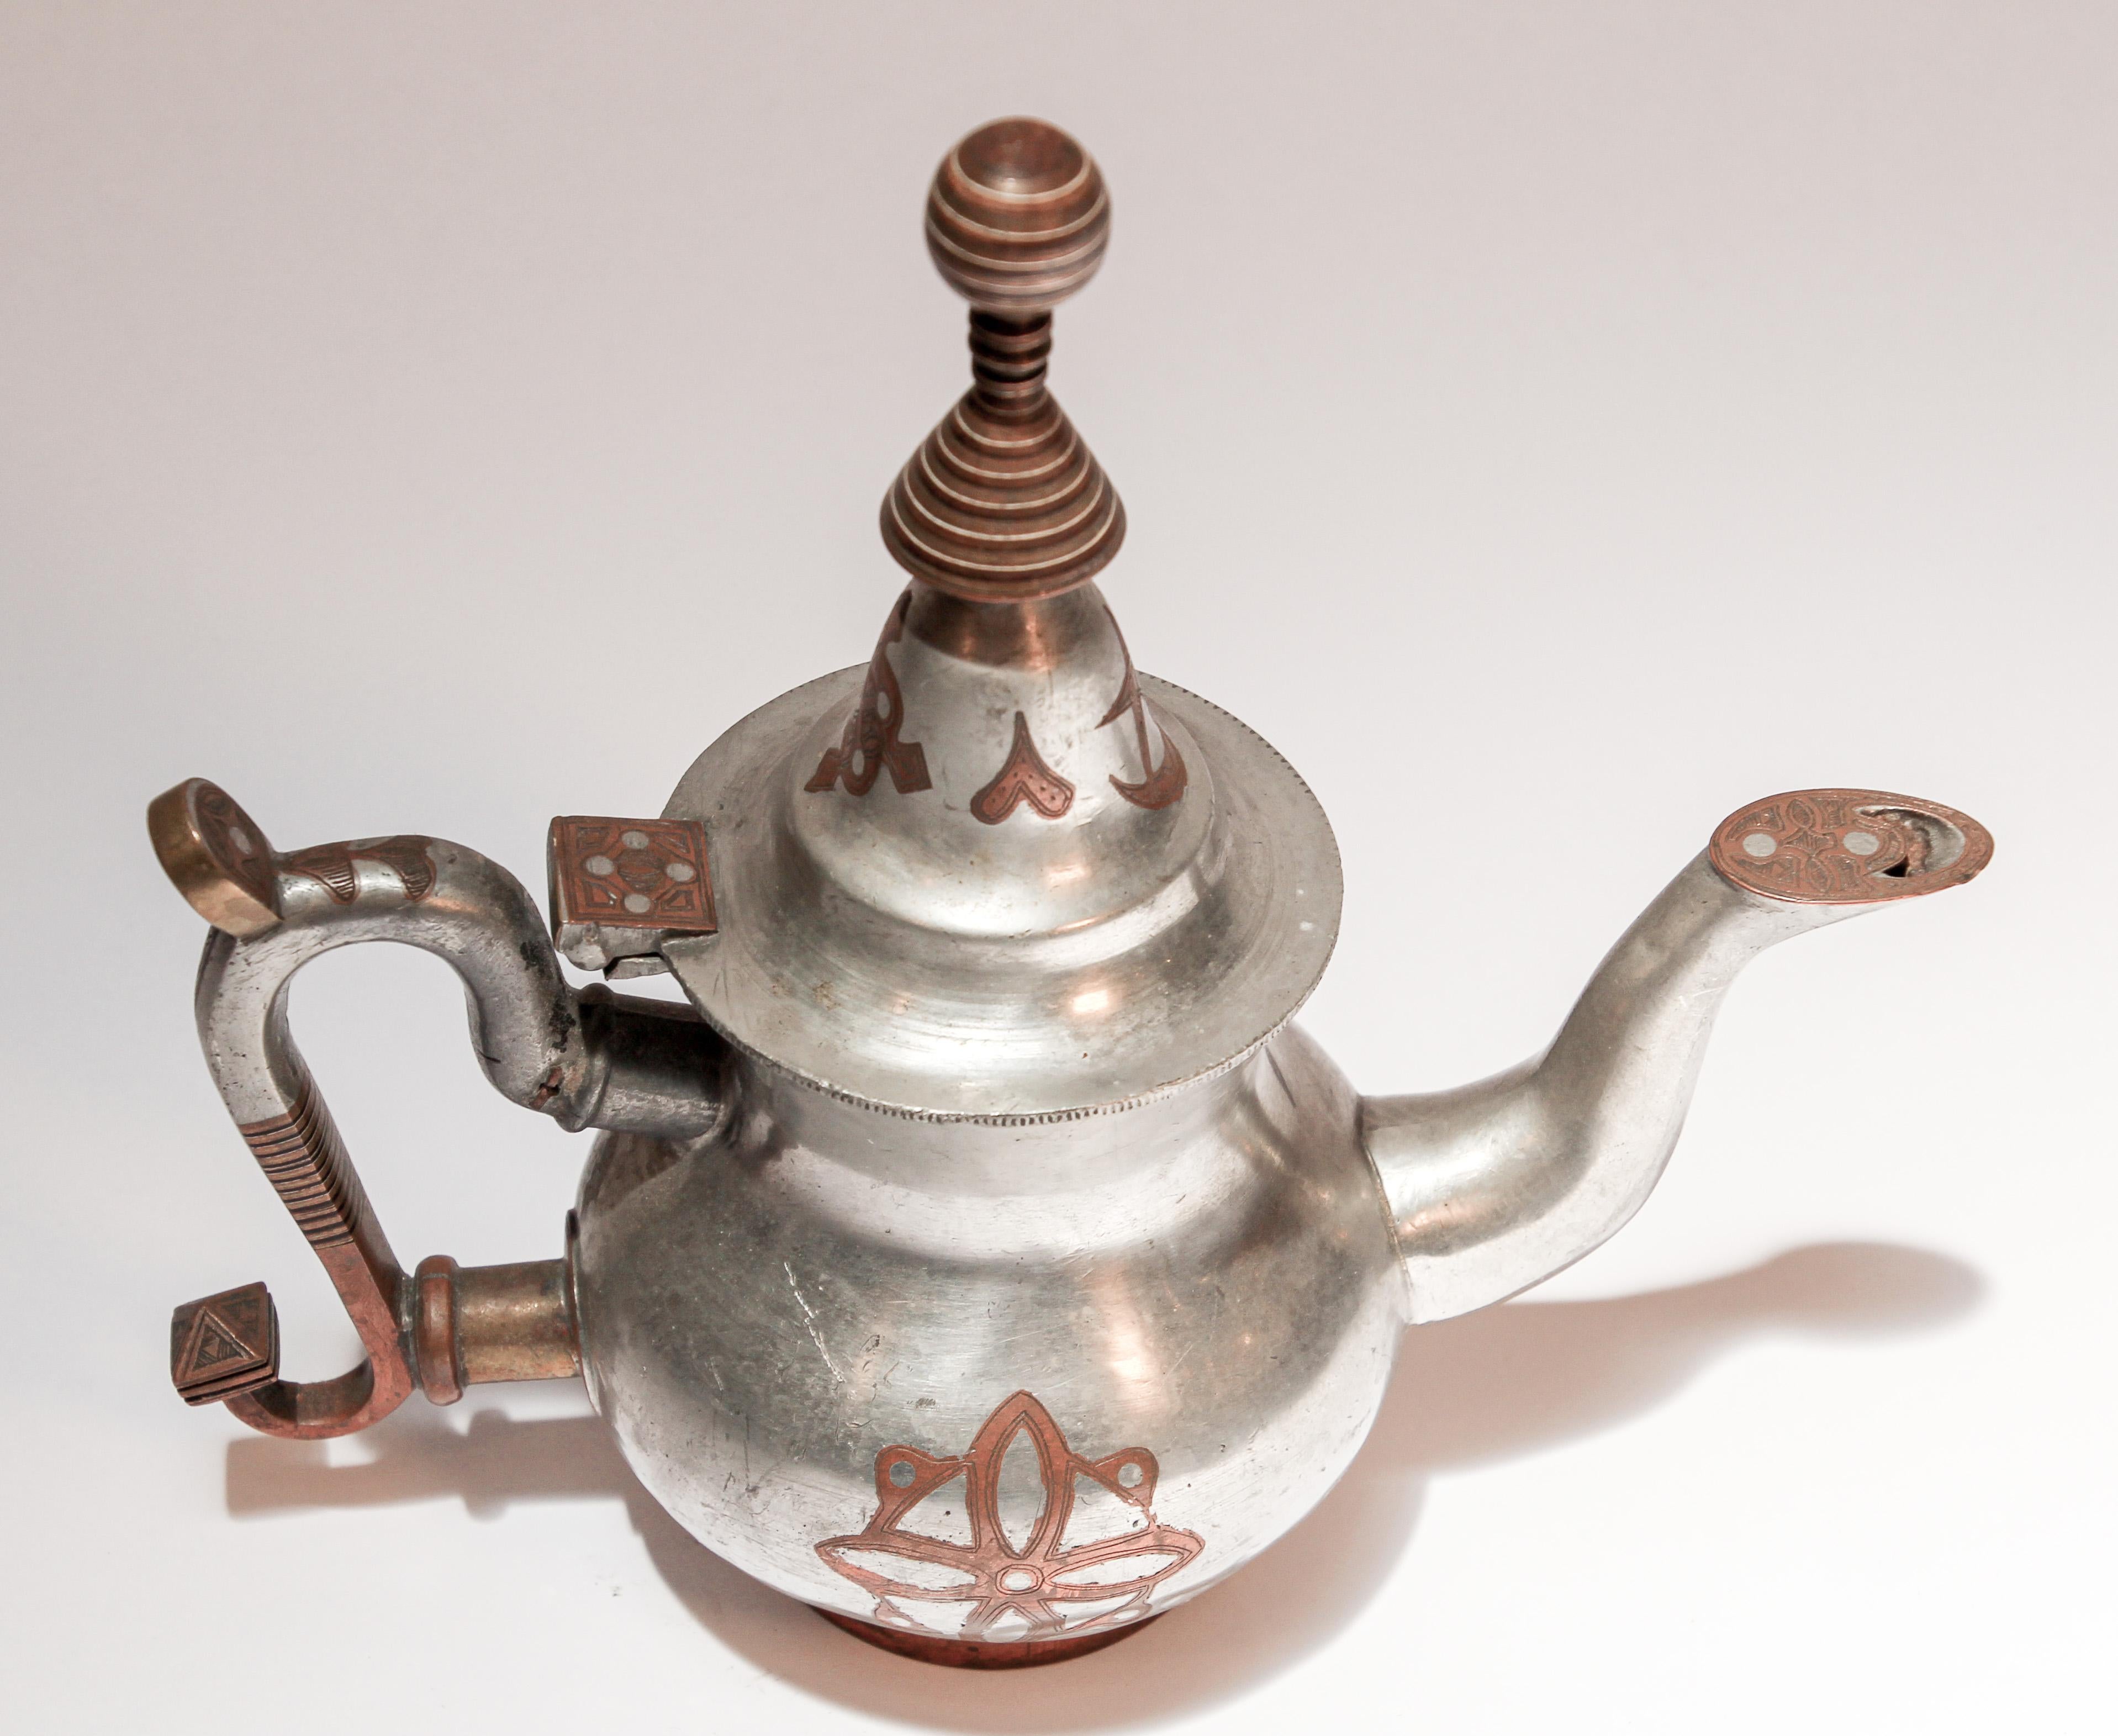 Mid-20th century Tuareg tea pot from Mauritania, Africa, Western Sahara.
Handcrafted of pewter, copper and brass decorations.
The Tuareg people inhabit a large area, covering almost all the middle and western Sahara and the north-central